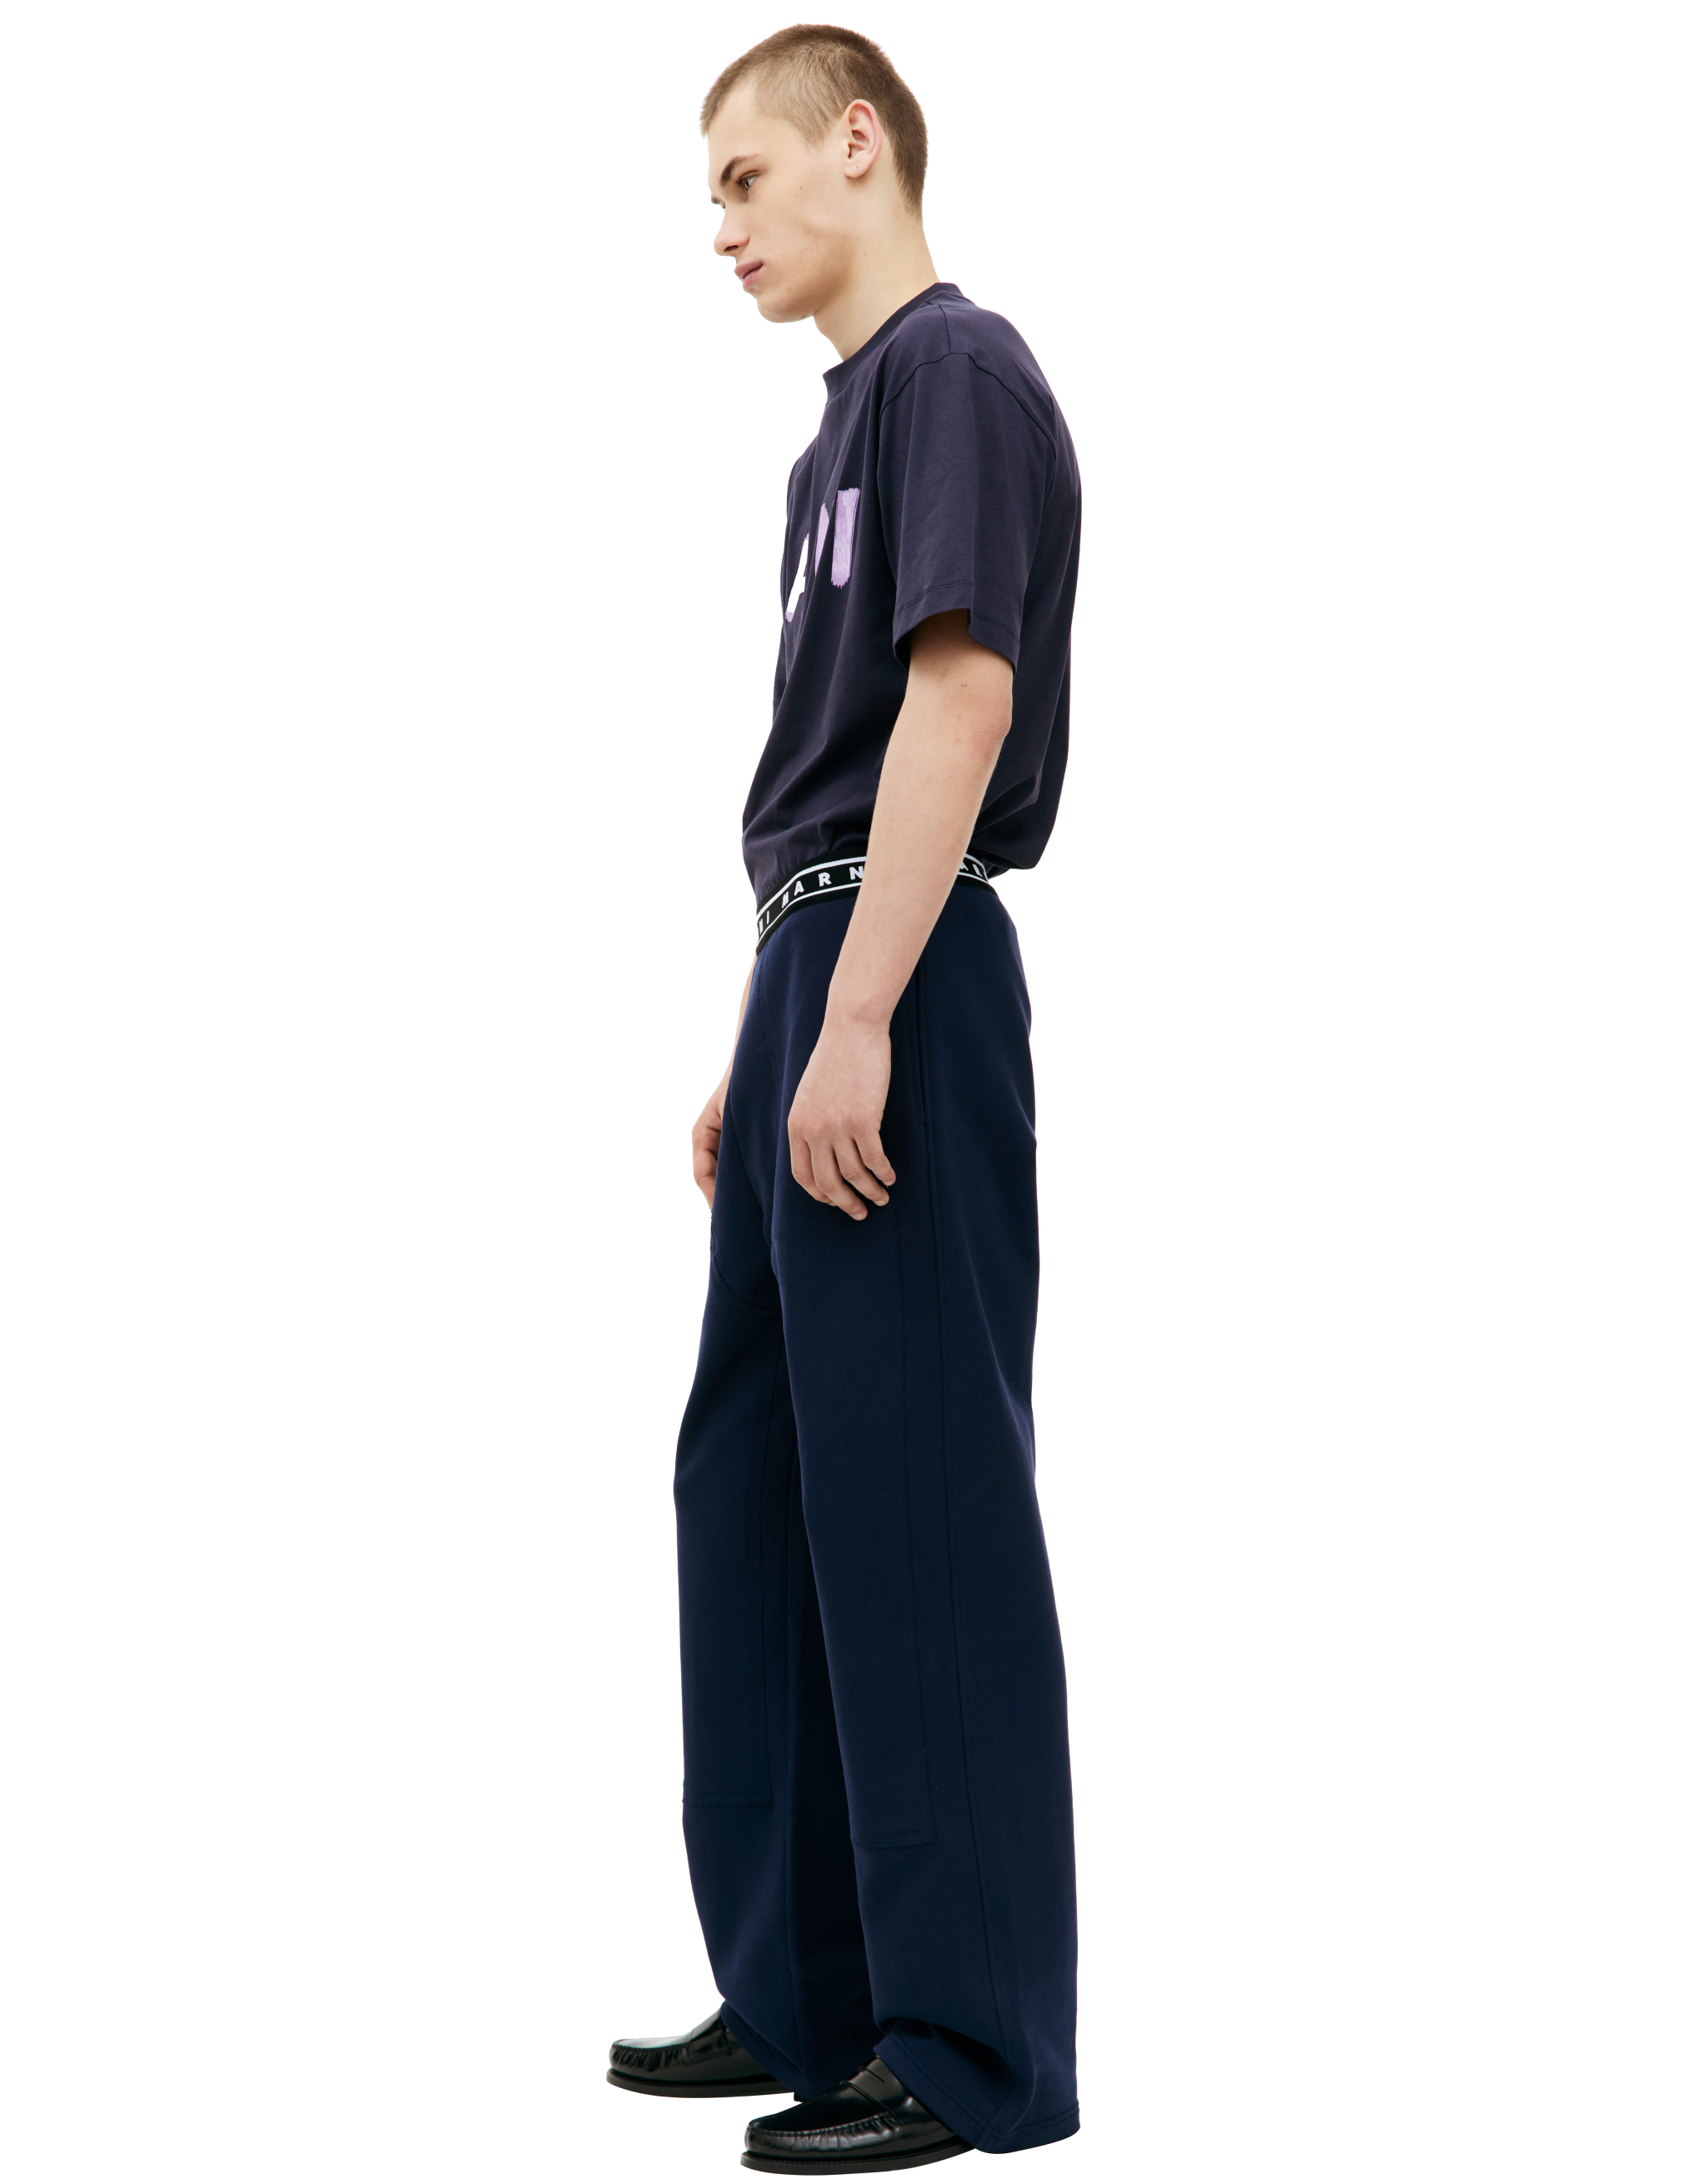 Shop Marni Navy Cotton Trousers In Navy Blue